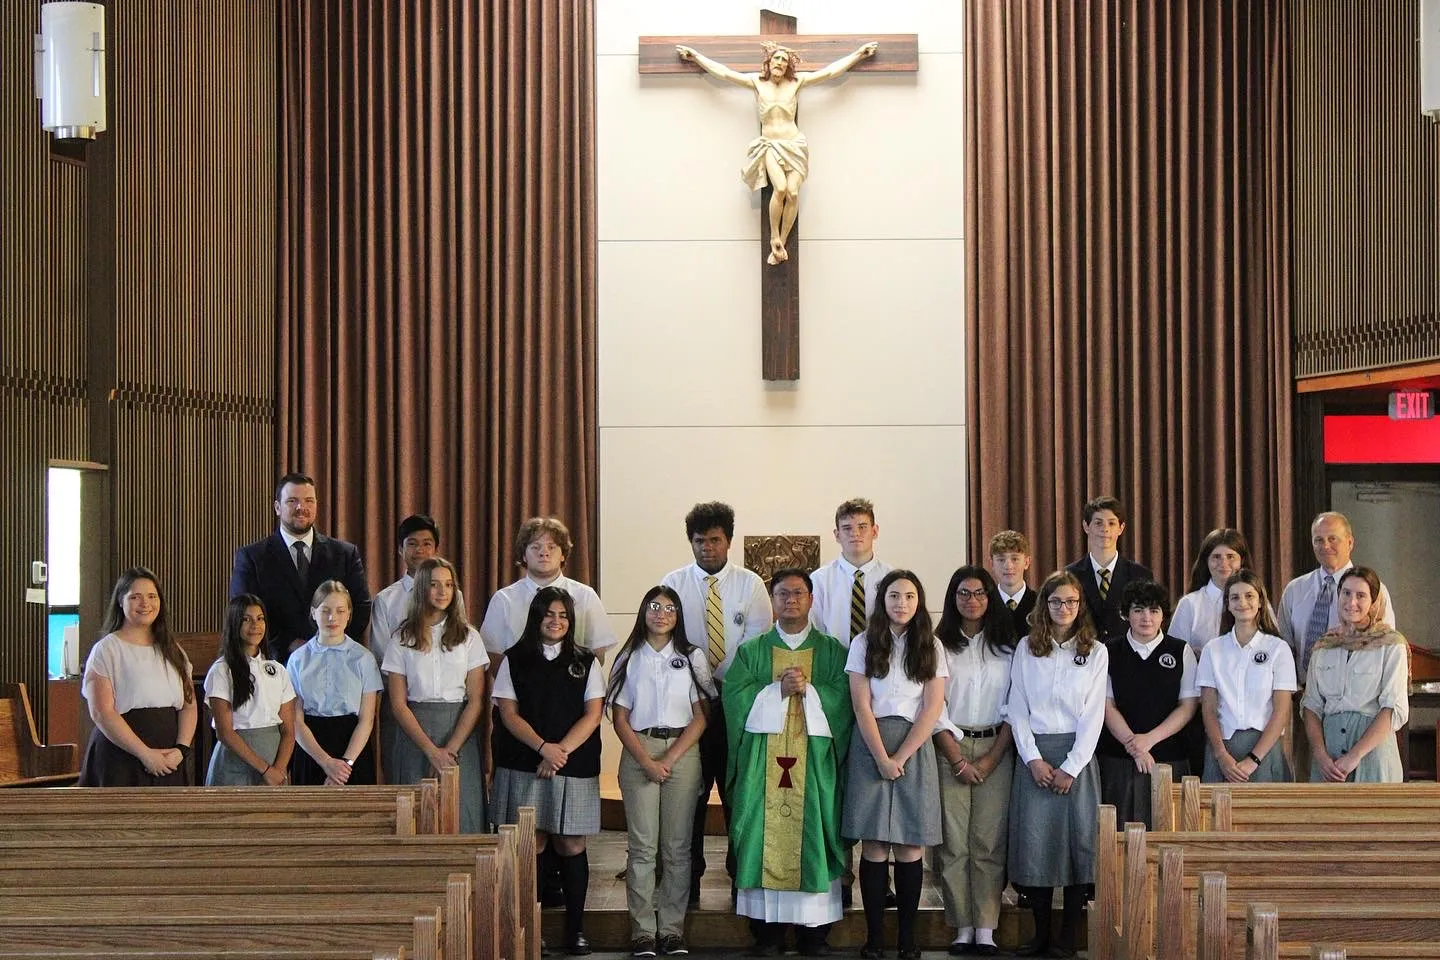 Chesterton students celebrate Mass in the school's new chapel.?w=200&h=150